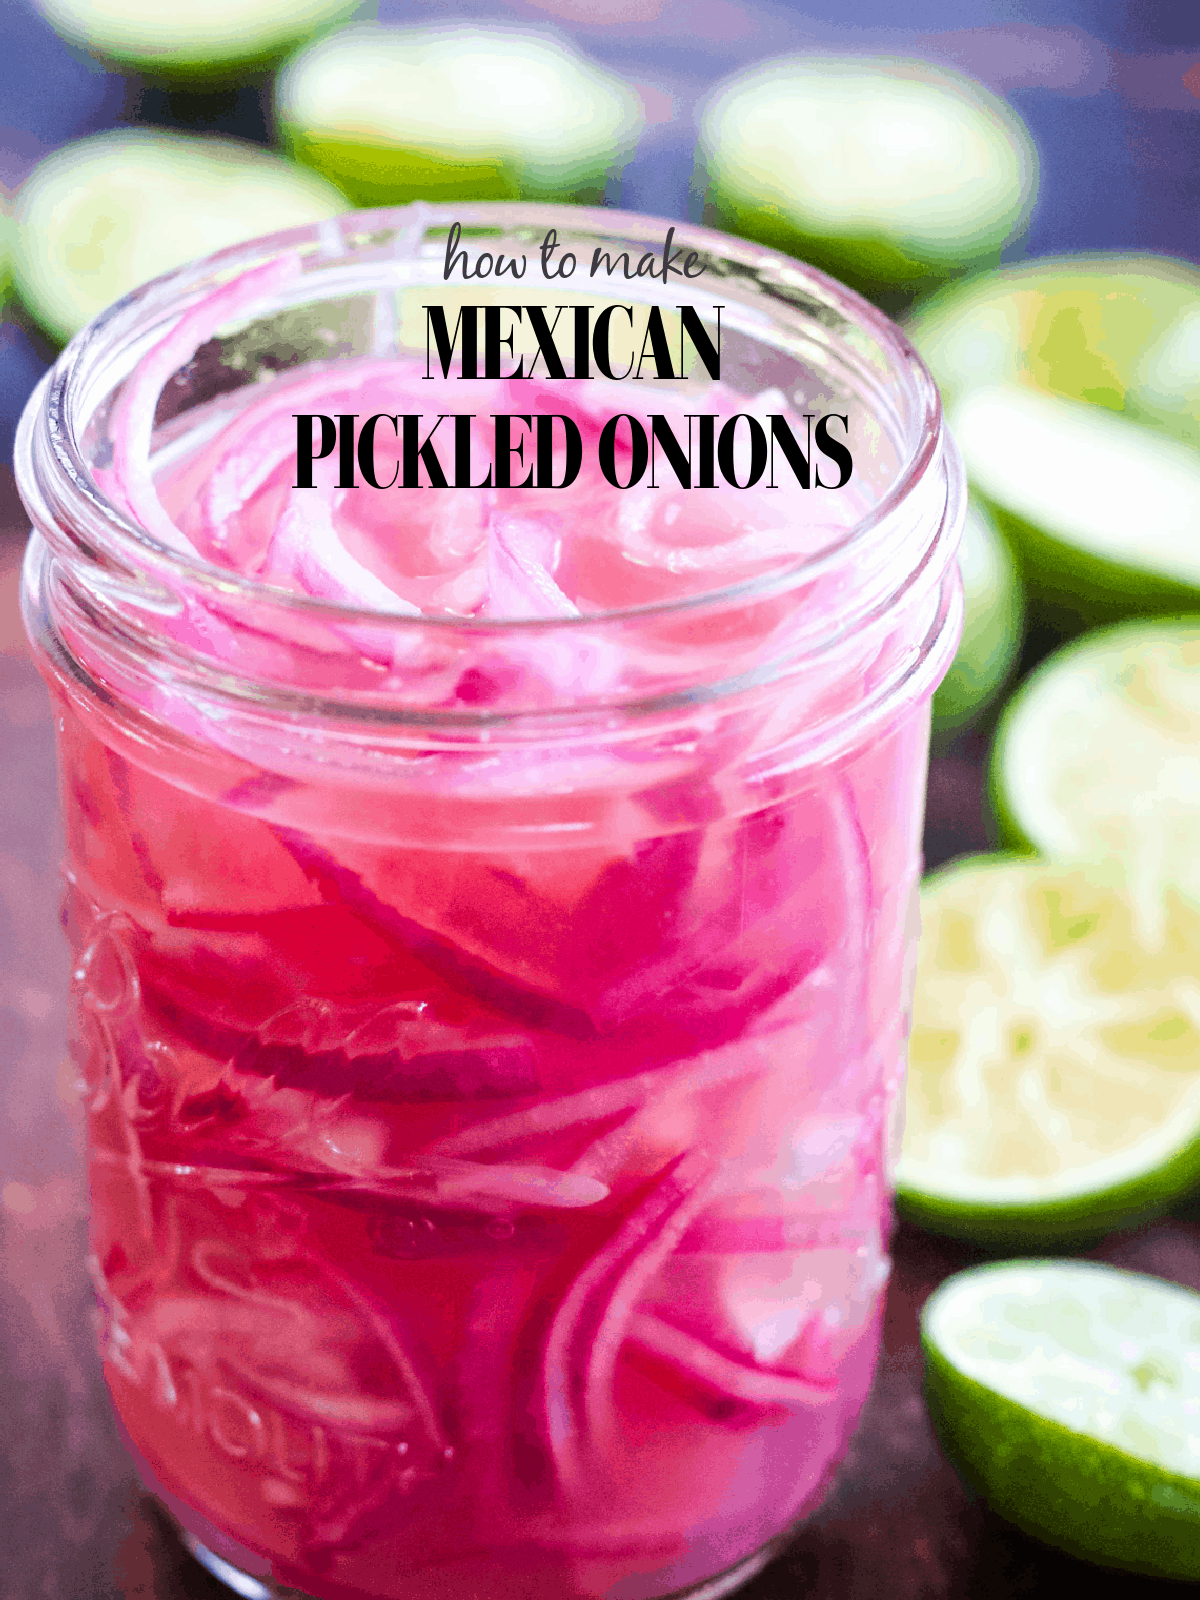 Mexican pickled onions in a jar.